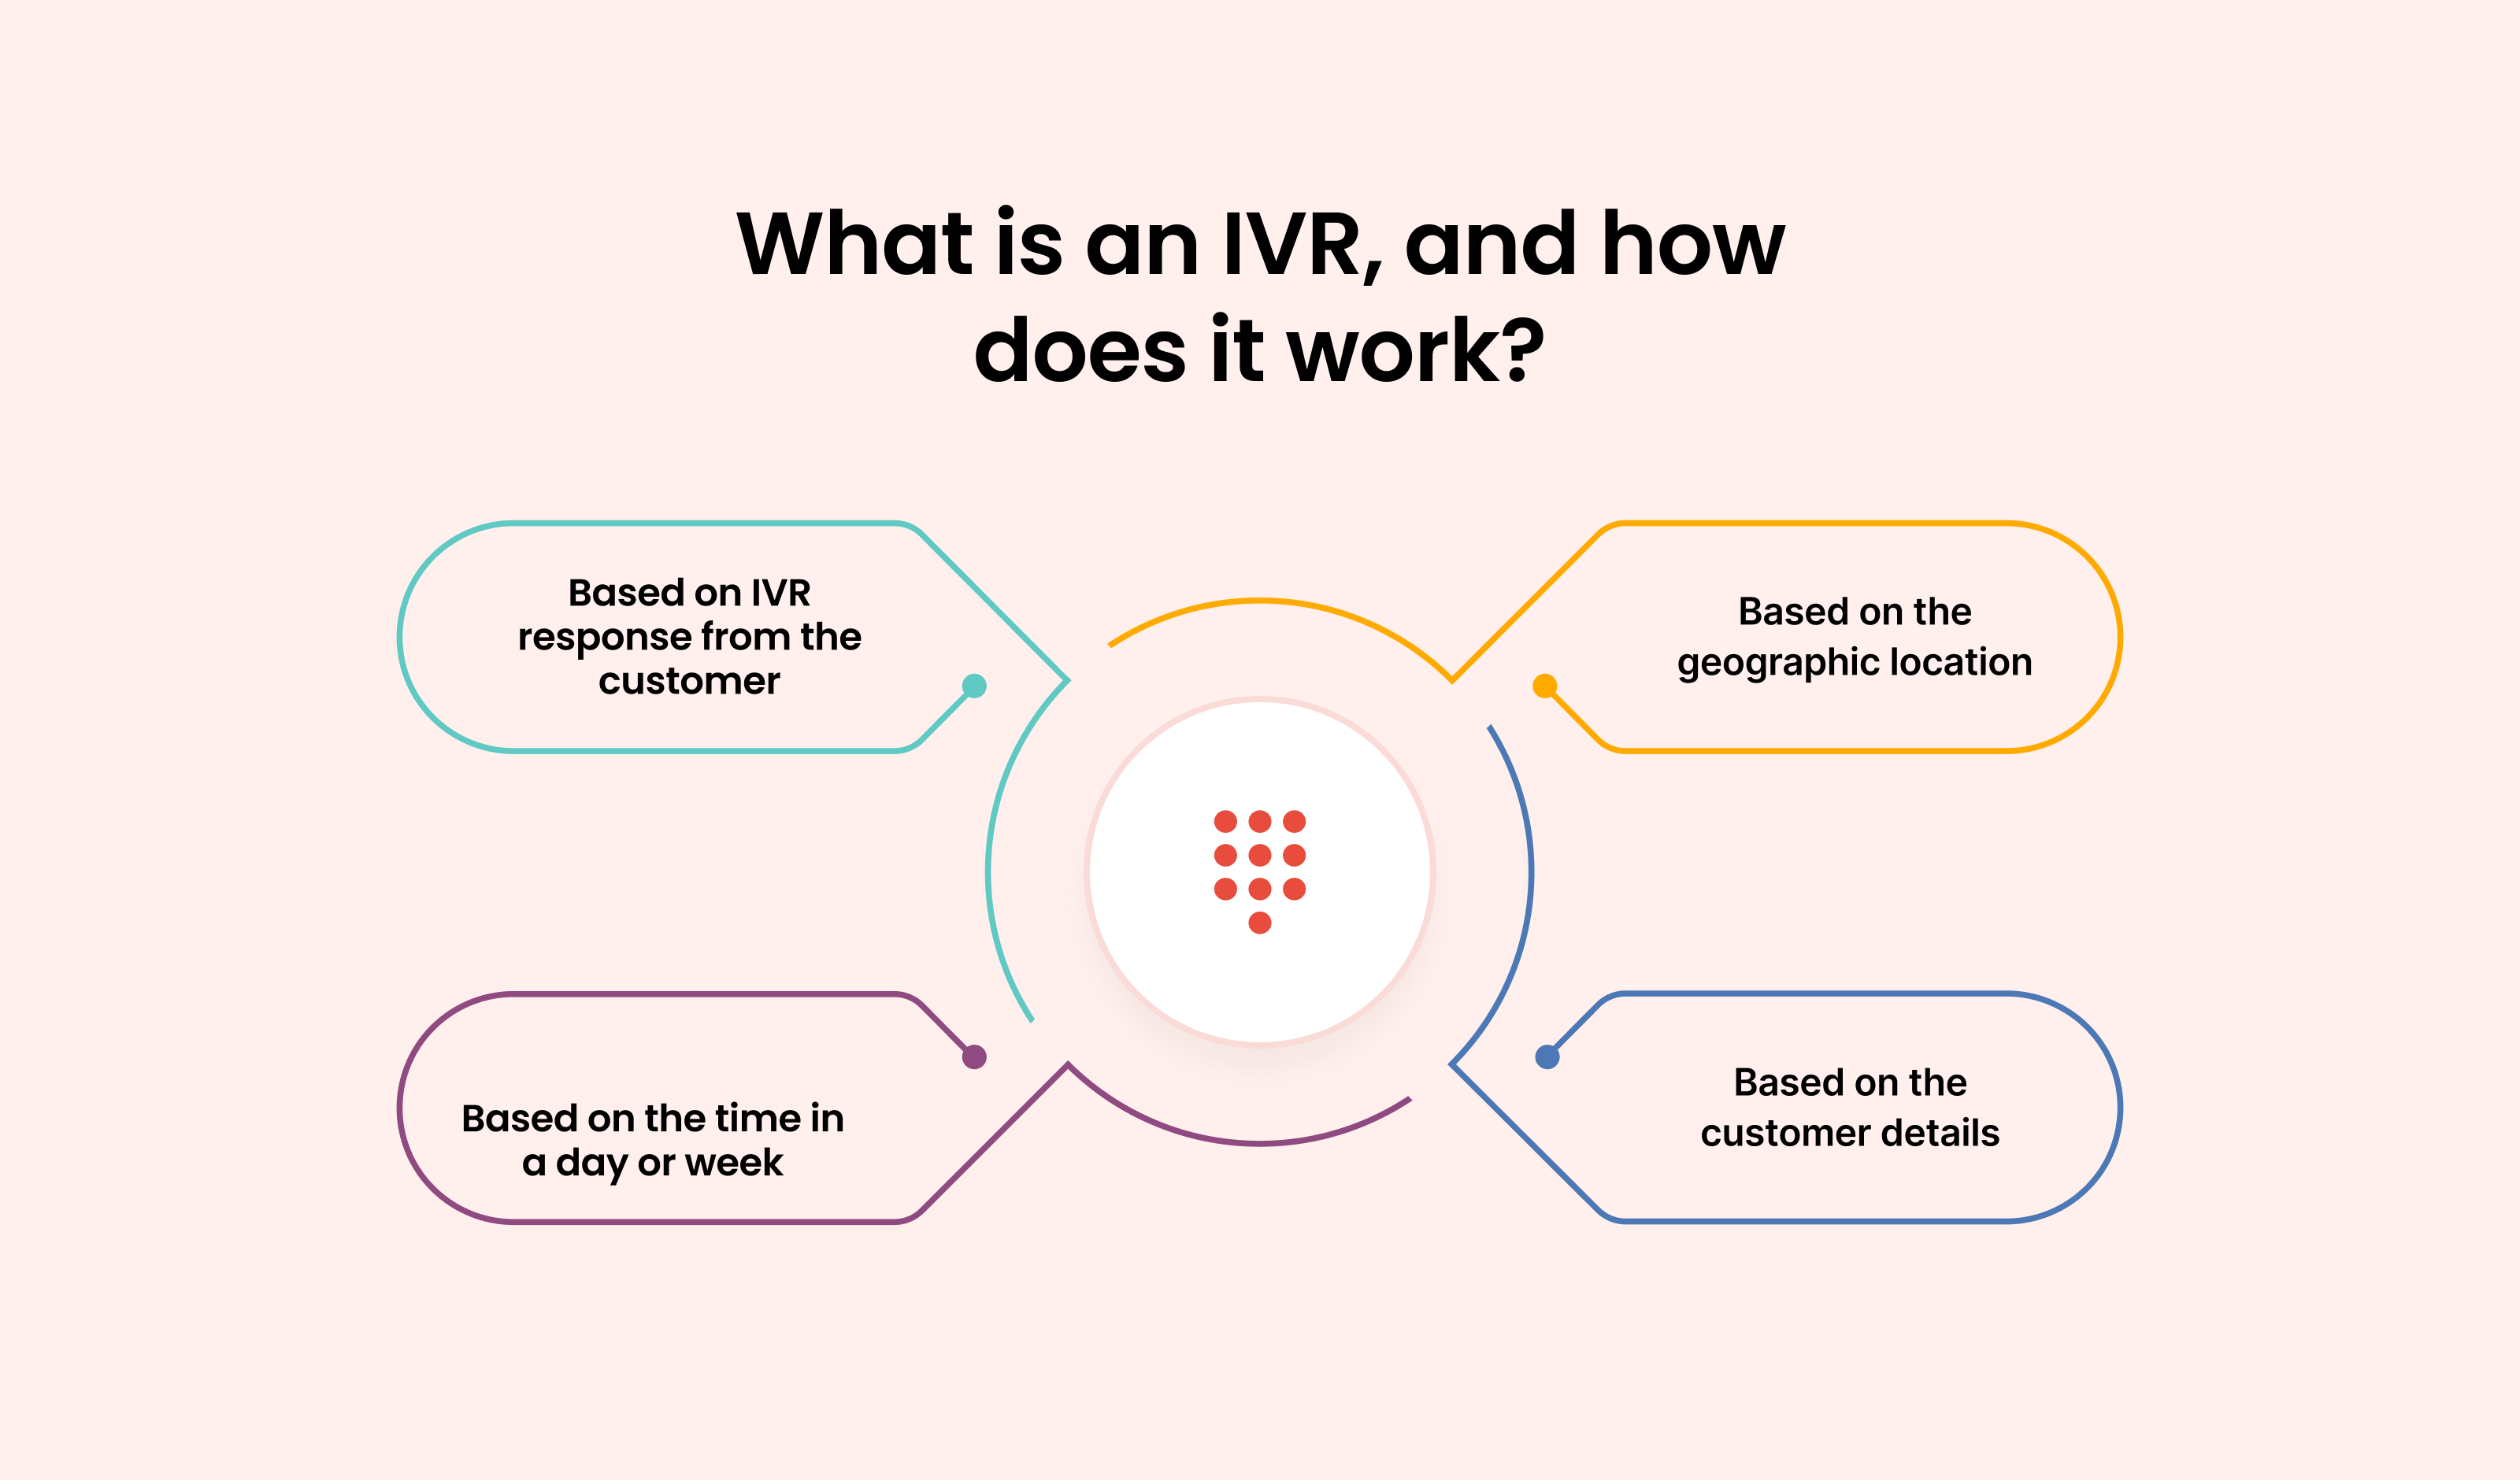 What is an IVR, and how does it work?